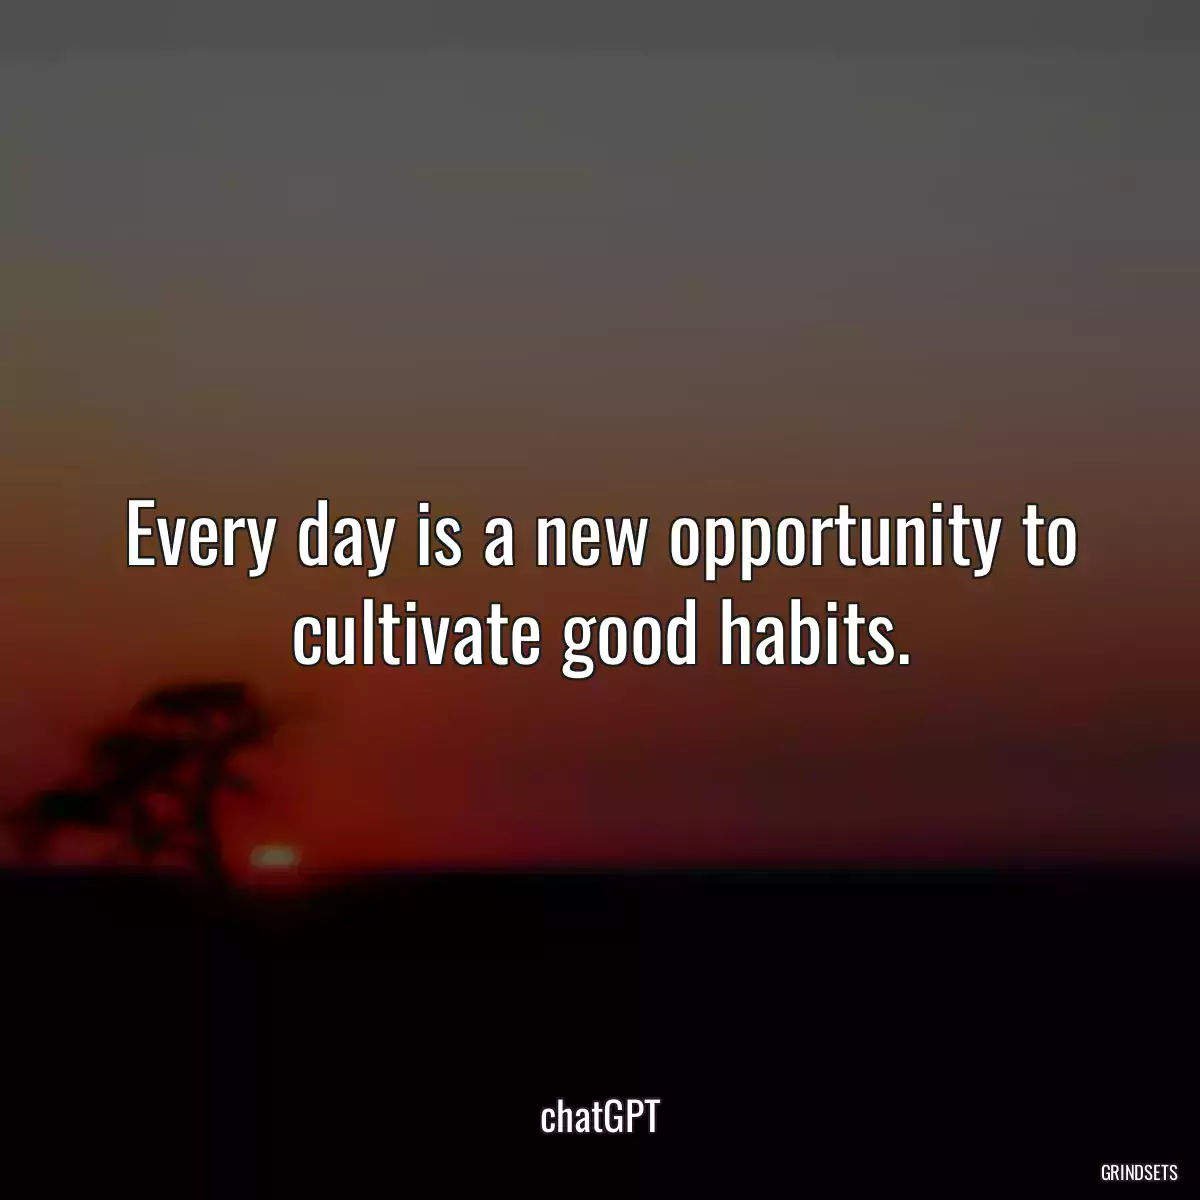 Every day is a new opportunity to cultivate good habits.